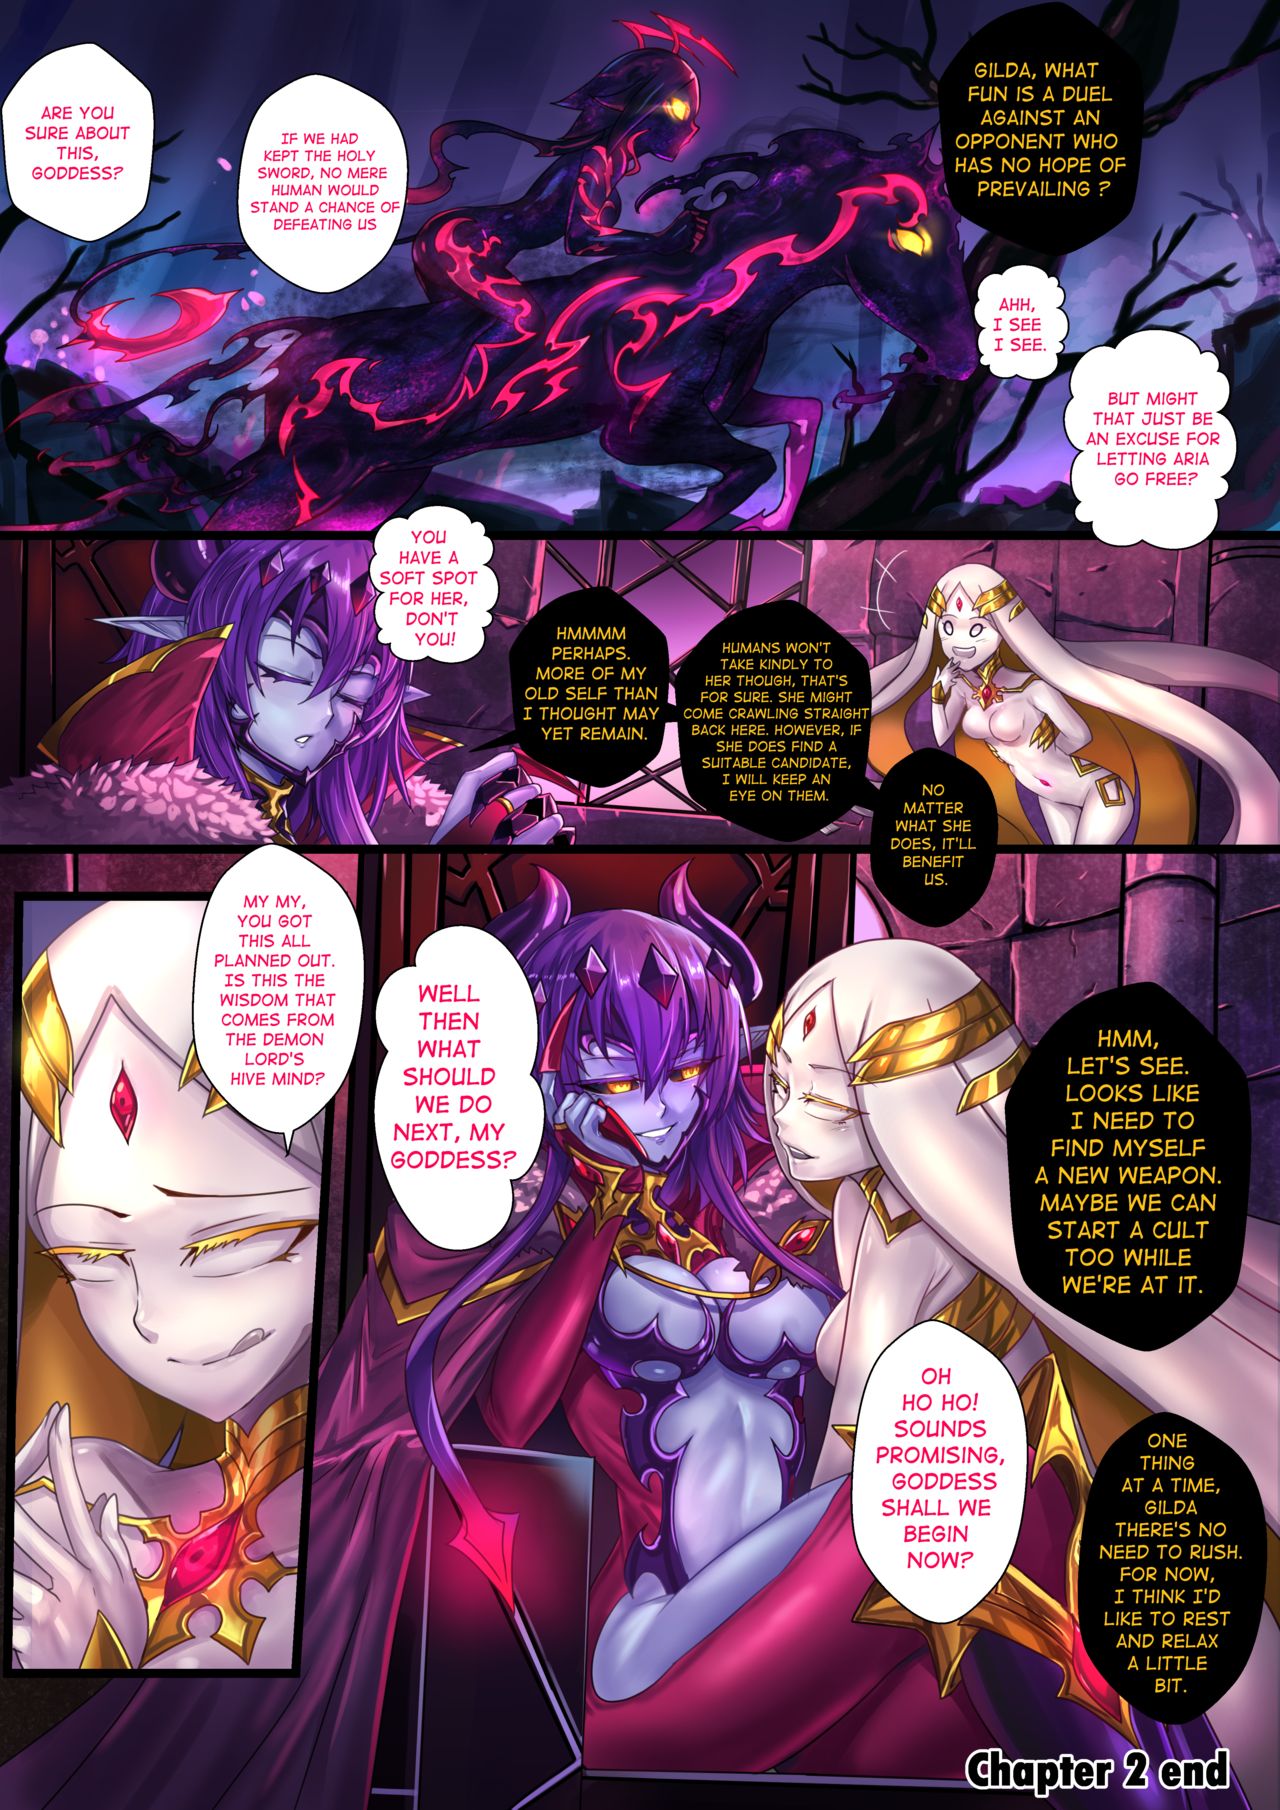 Demon lord Chapter 2 part 3 - Page 9 - HentaiEra